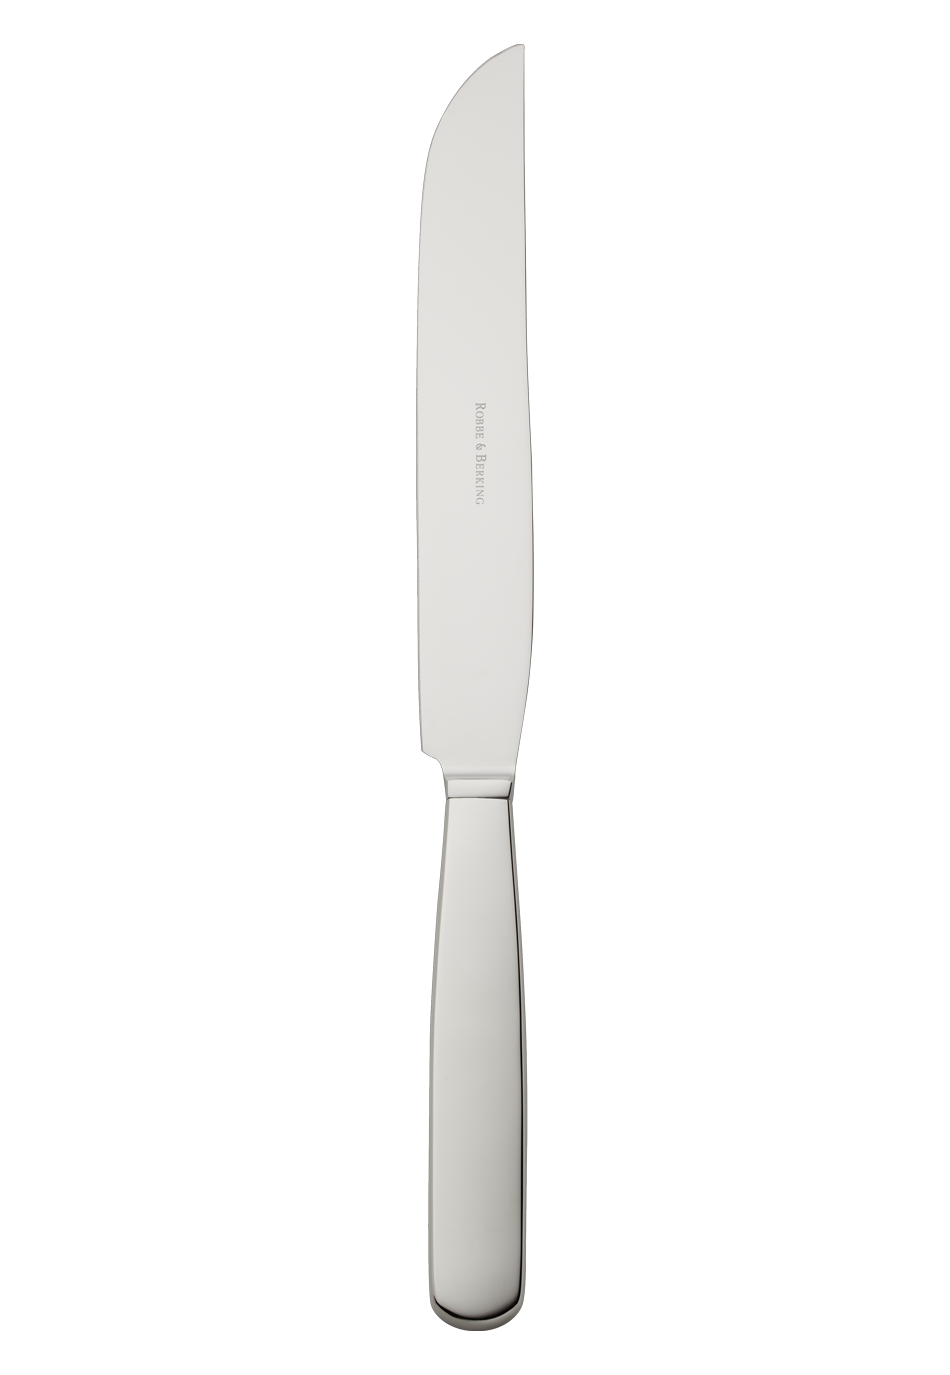 Topos Carving Knife (18/8 stainless steel)